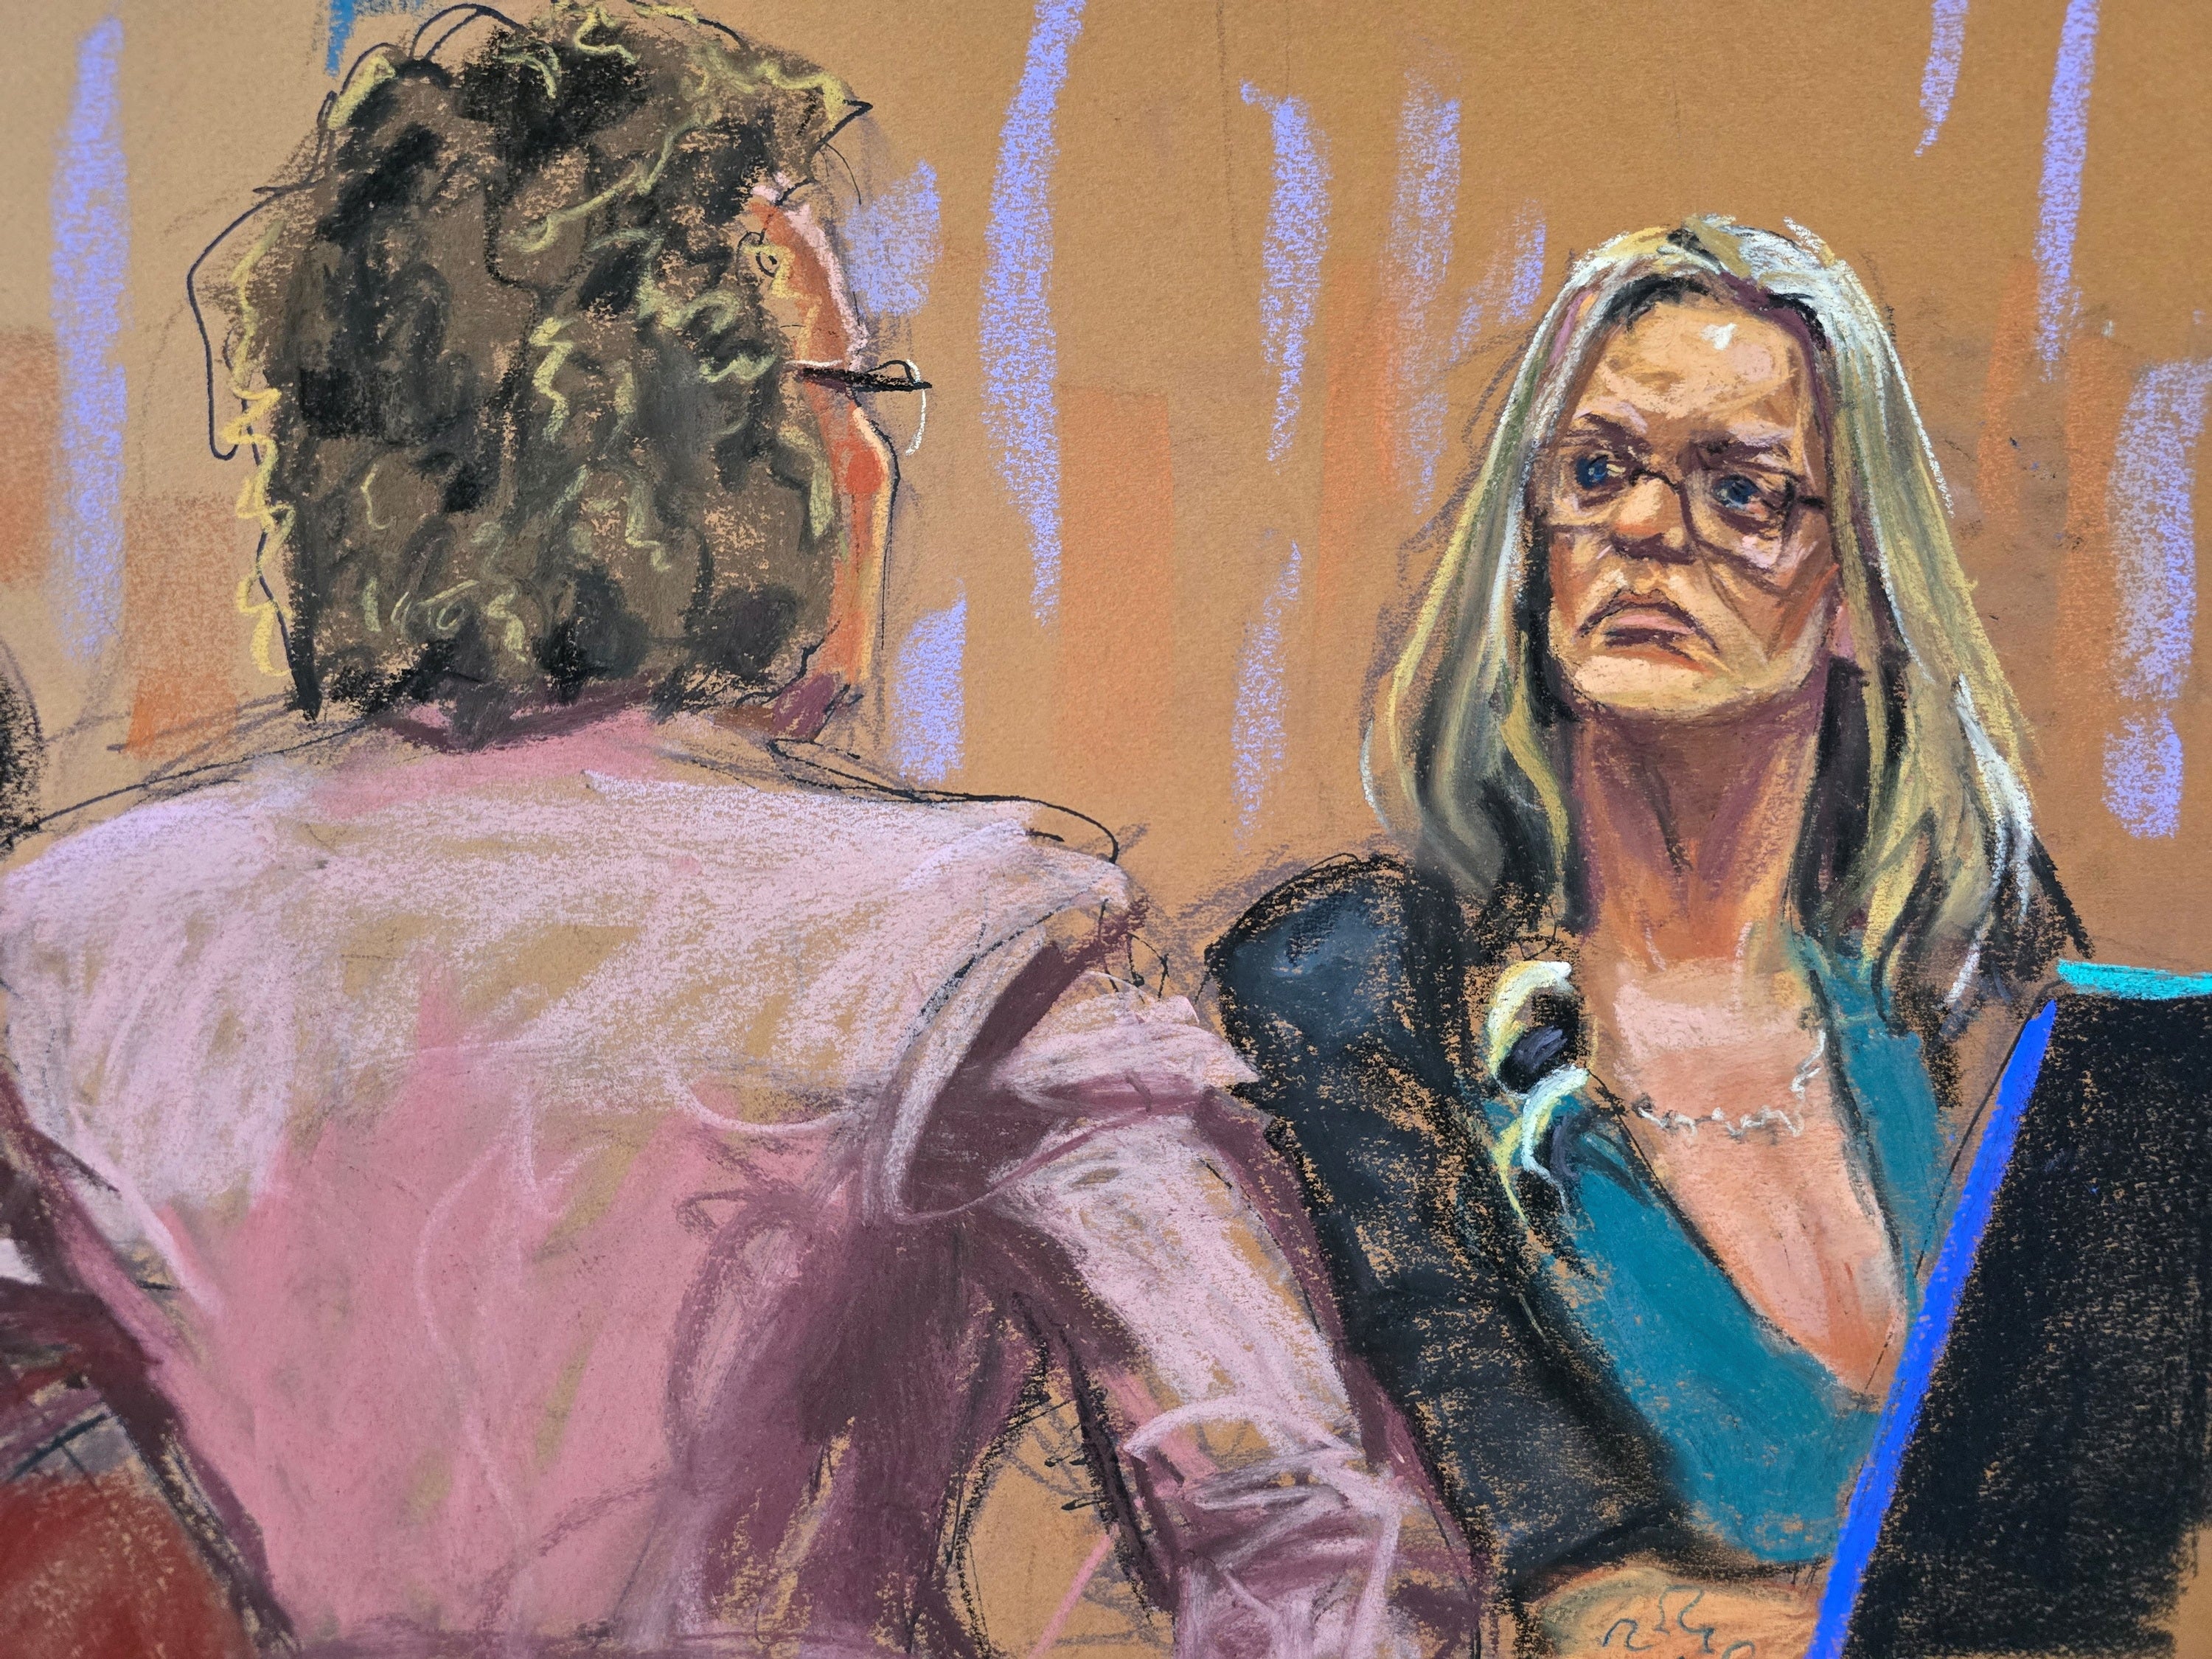 Stormy Daniels during cross-examination at the criminal trial of Donald Trump